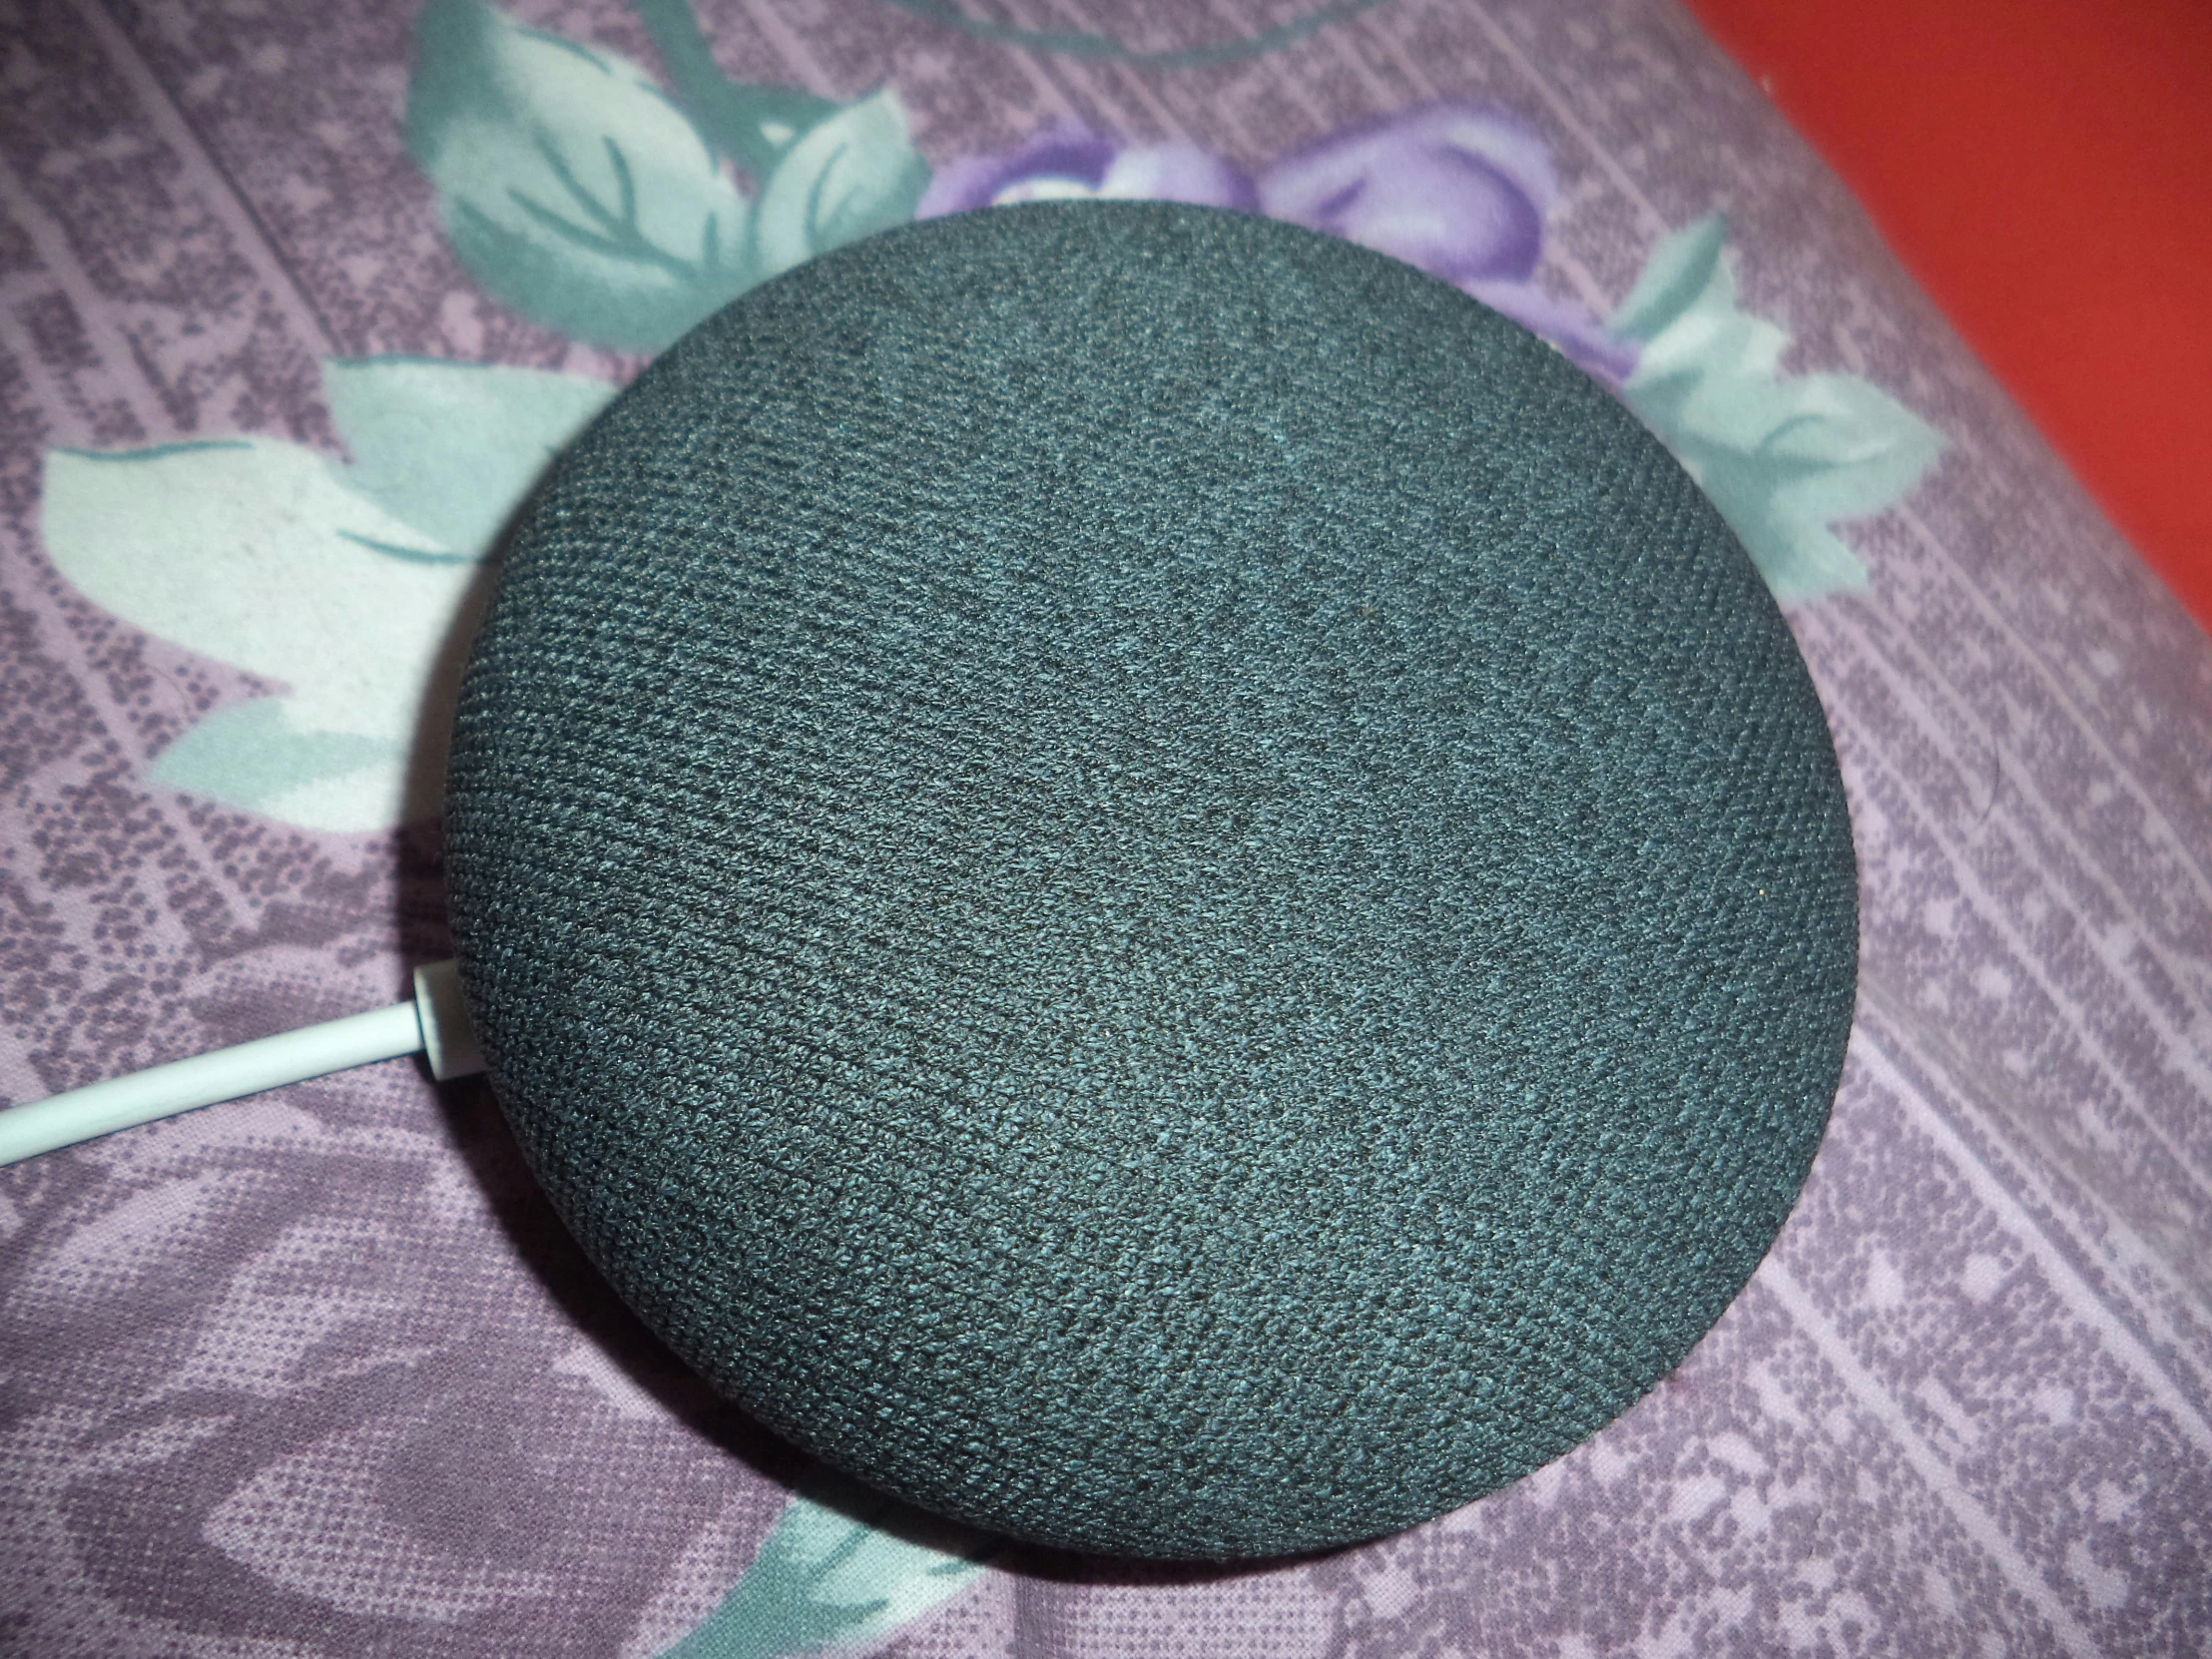 an image of an audio device sitting on a pillow